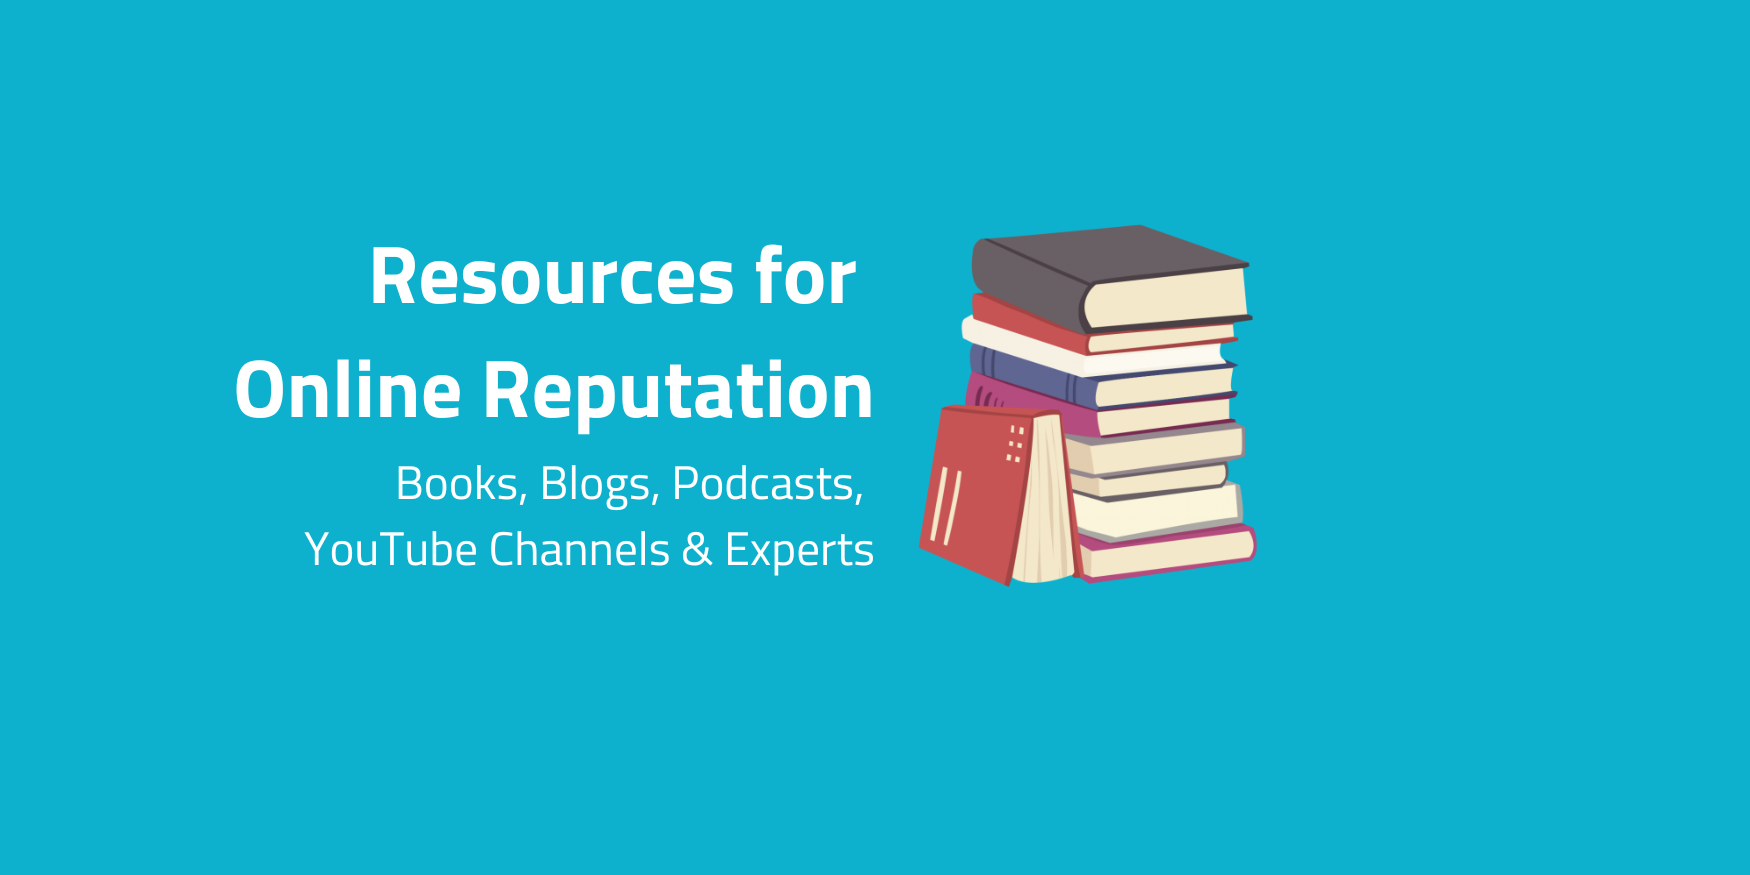 Resources for Online Reputation (1)